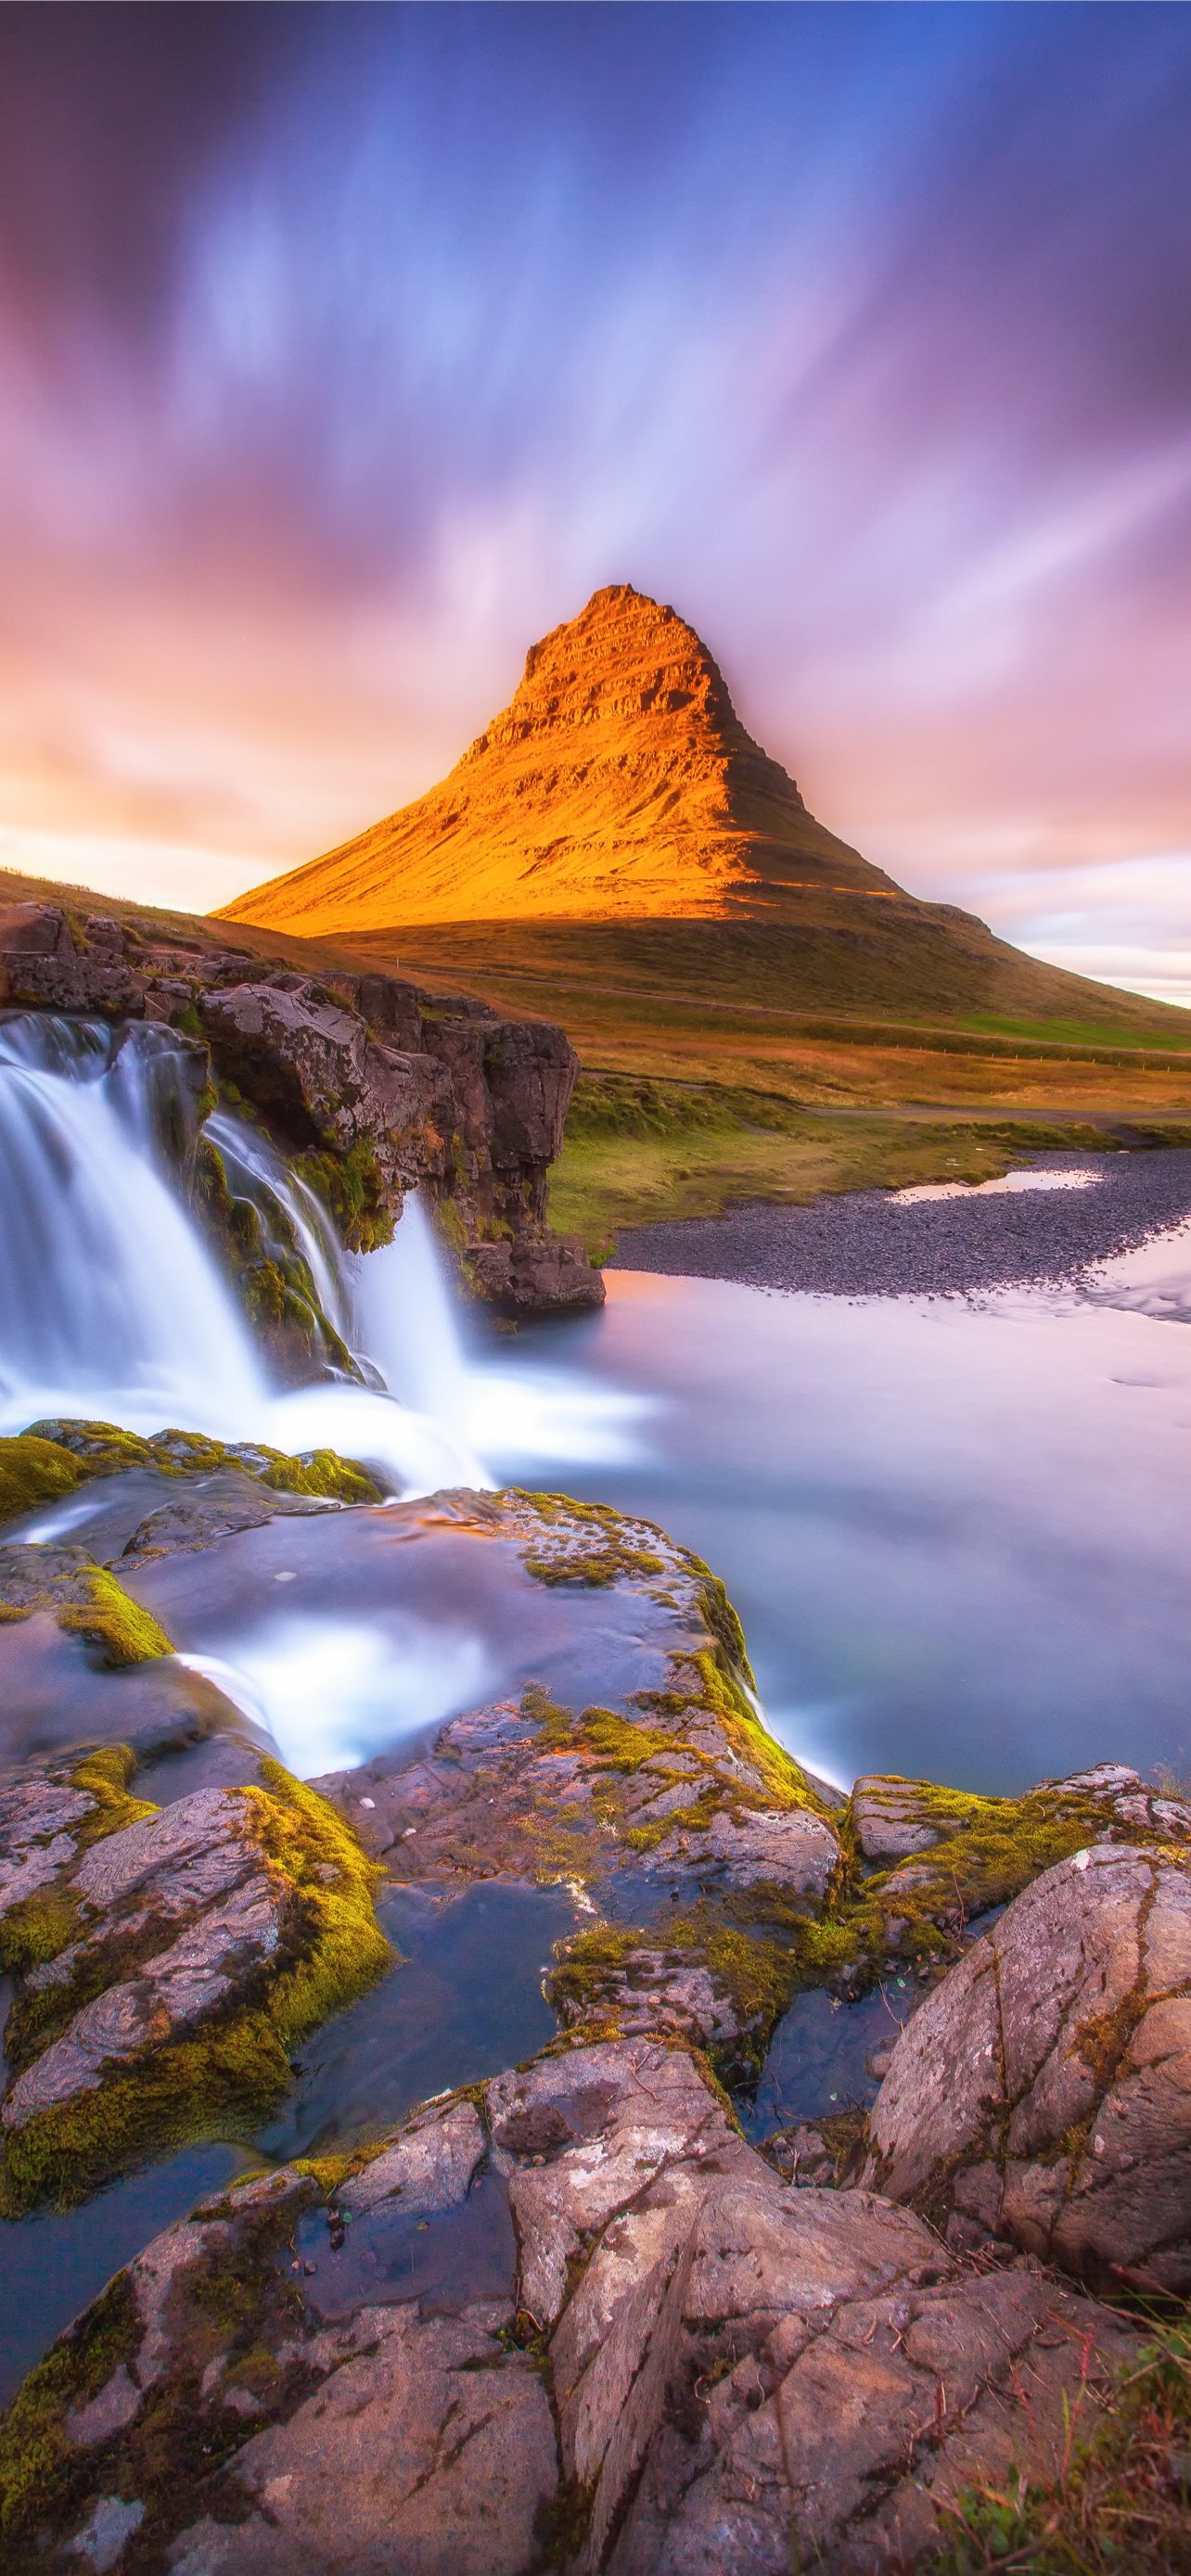 The Iceland King iPhone Wallpapers Free Download